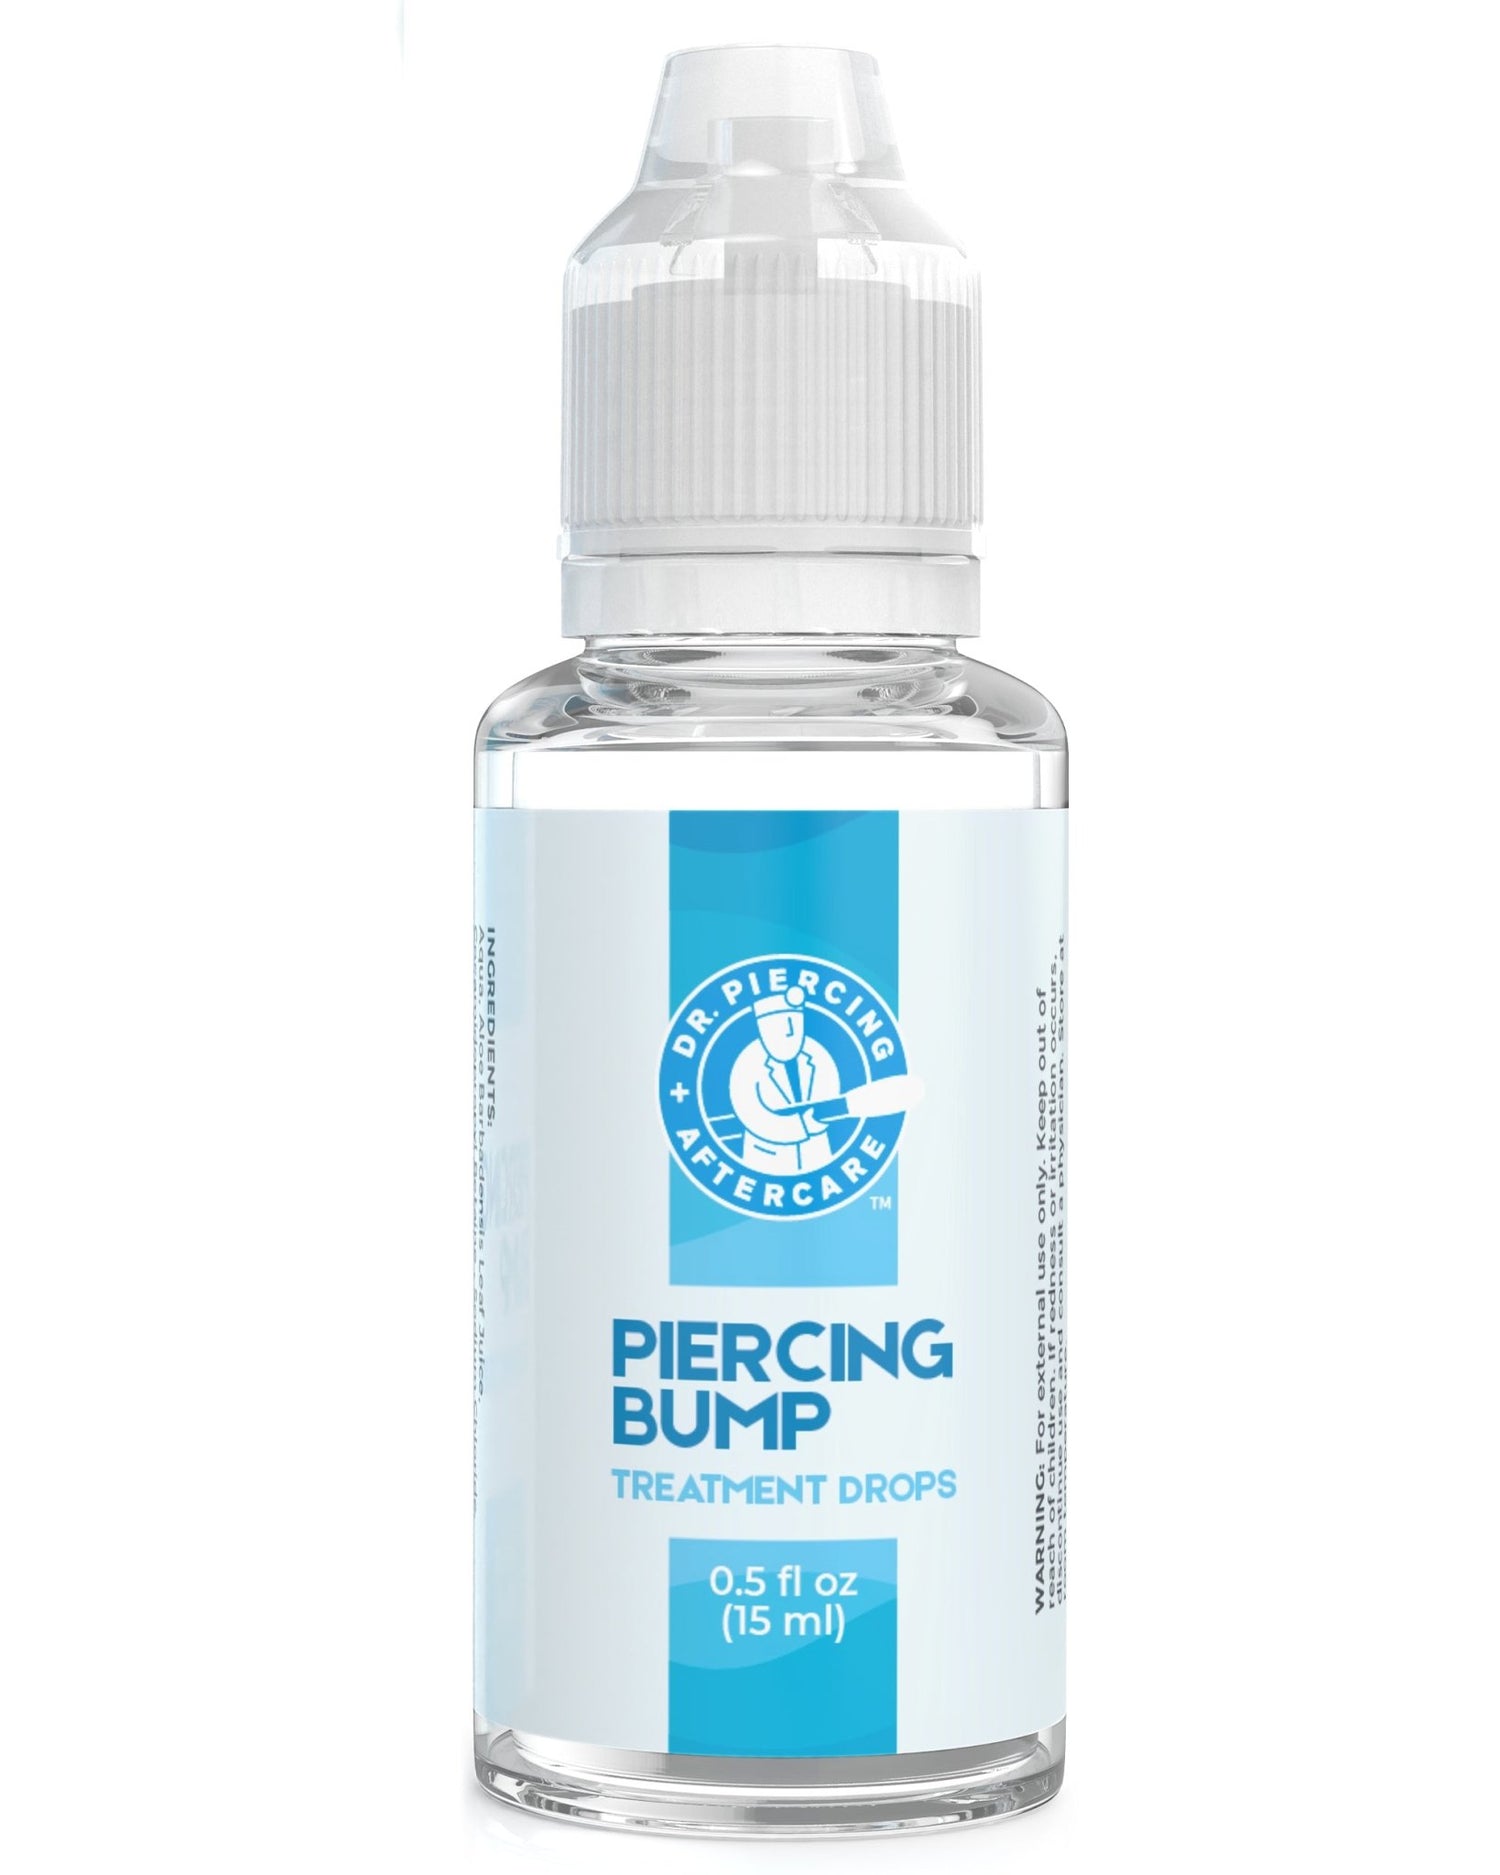 Base Labs Piercing Aftercare Spray, Saline Solution for Piercings, Bumps, 4 oz